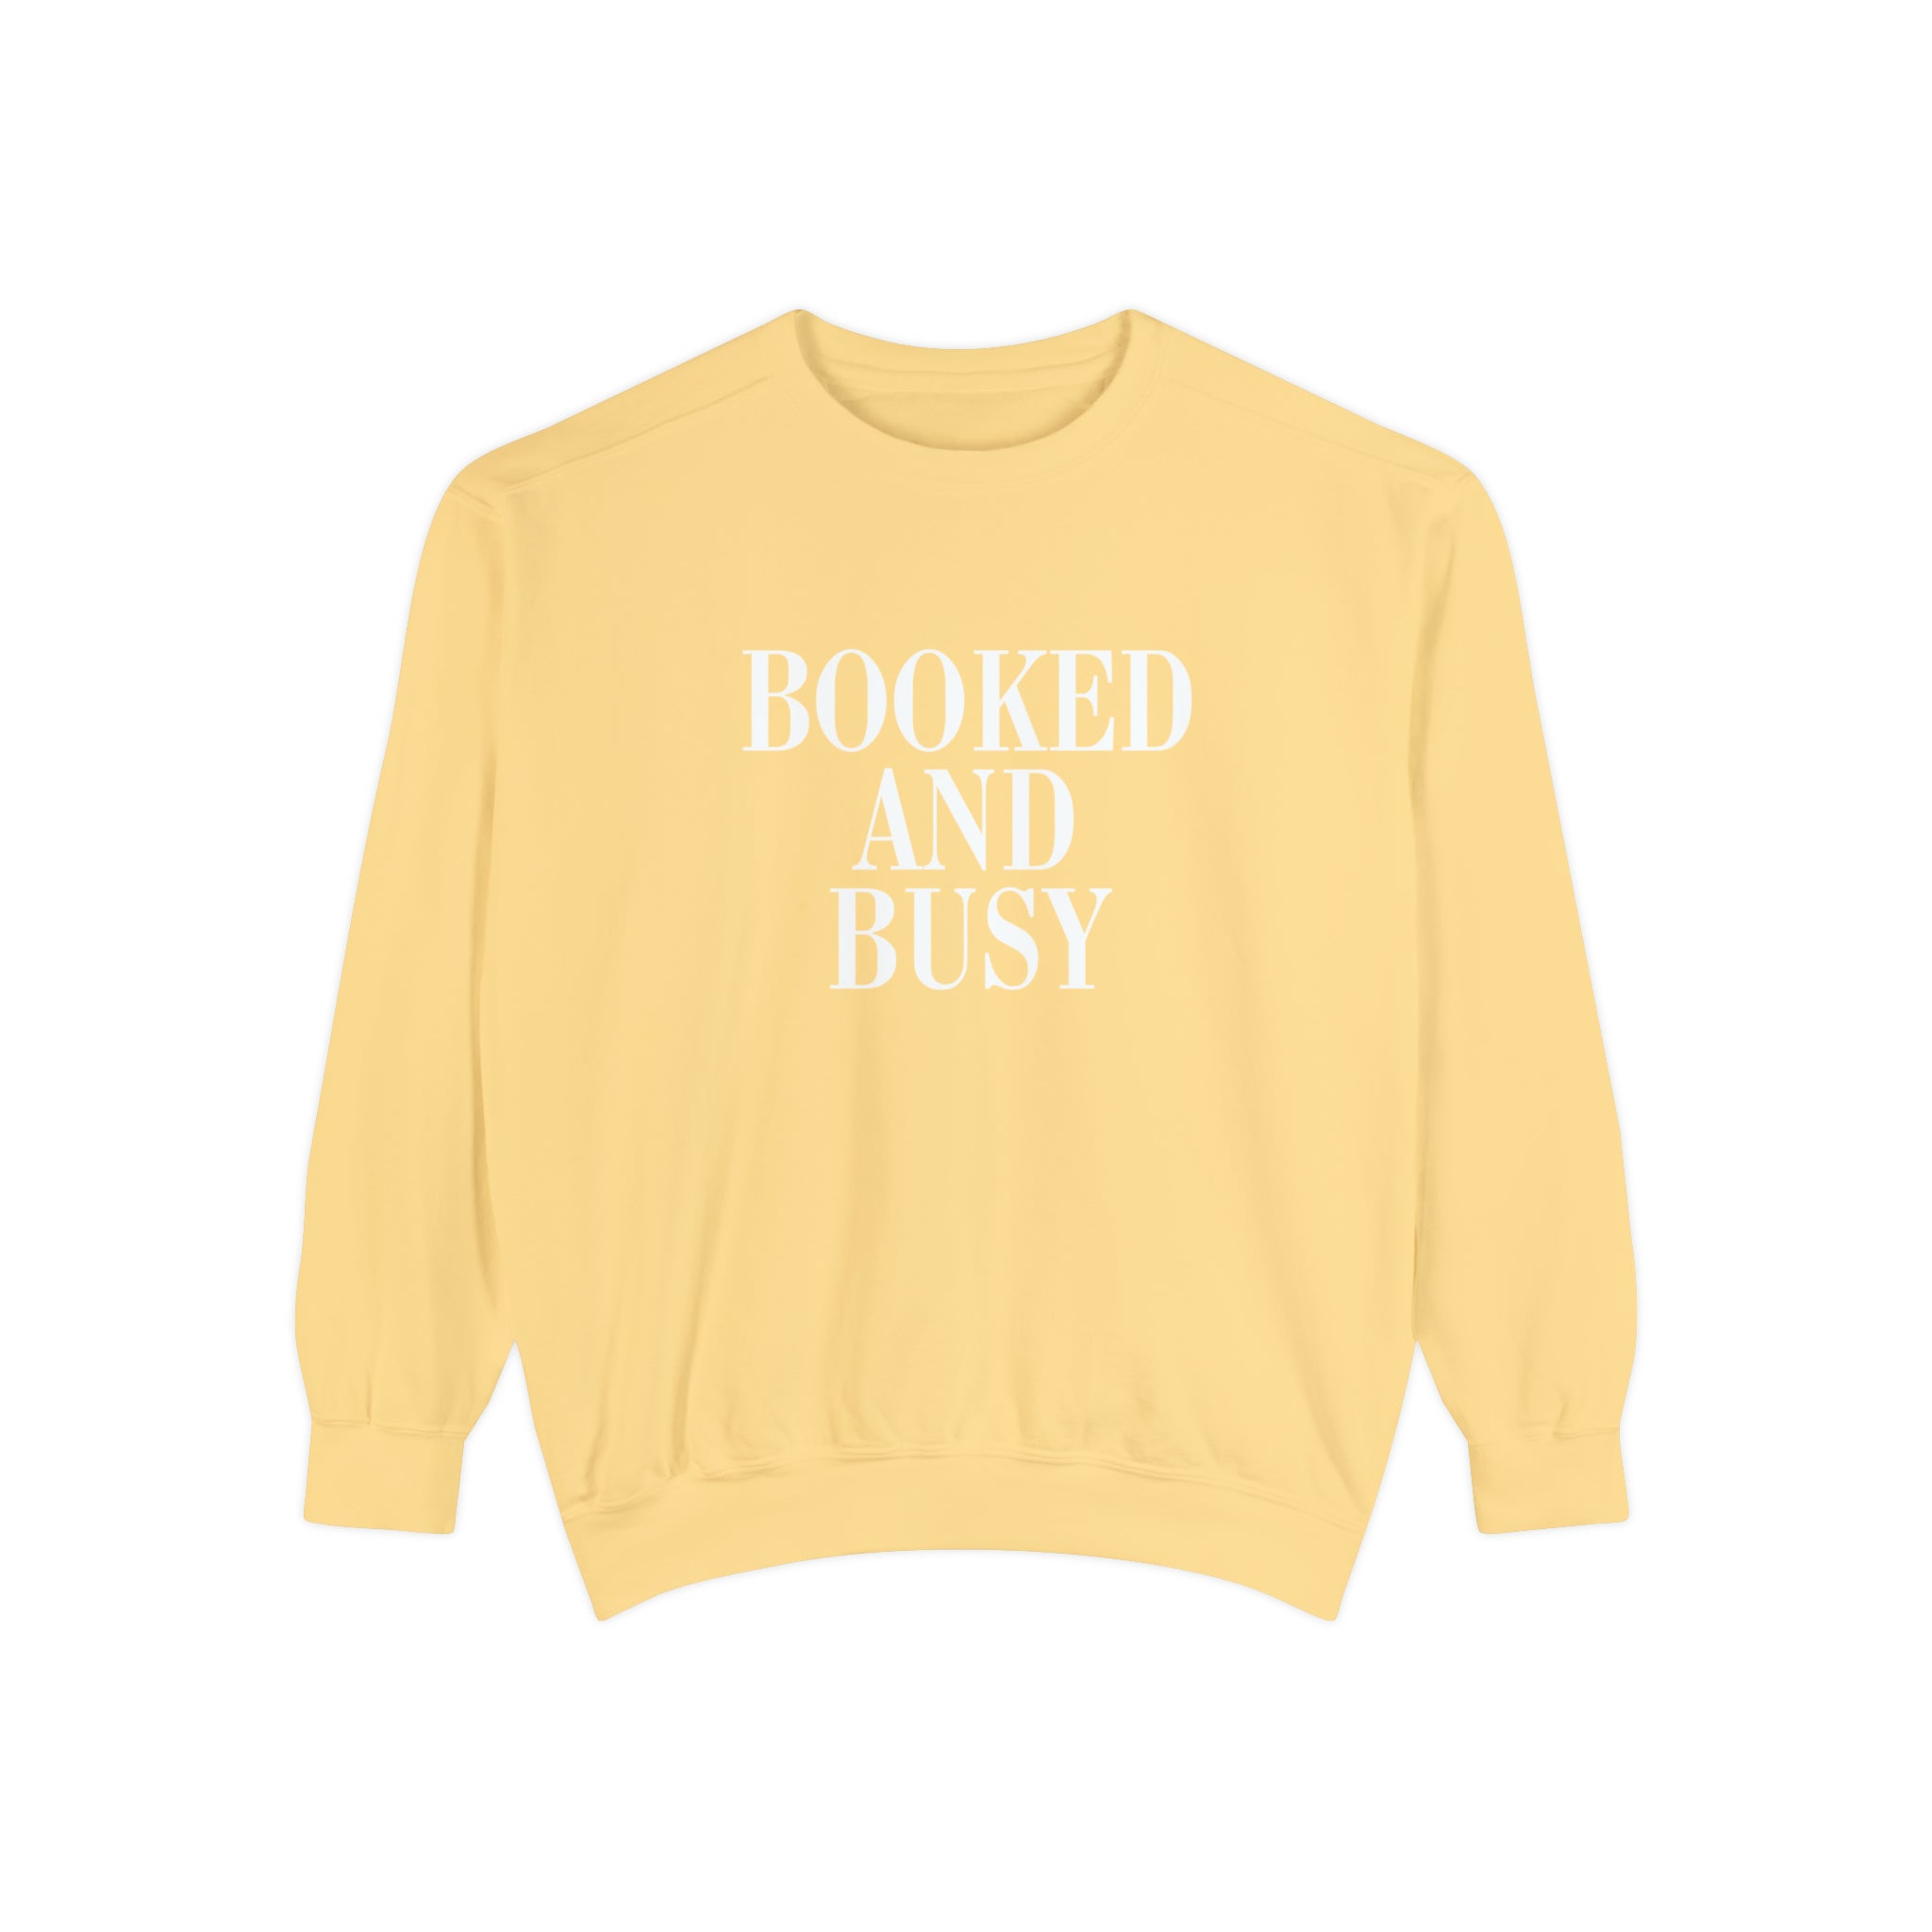 Booked and Busy Comfort Colors Crewneck Sweatshirt